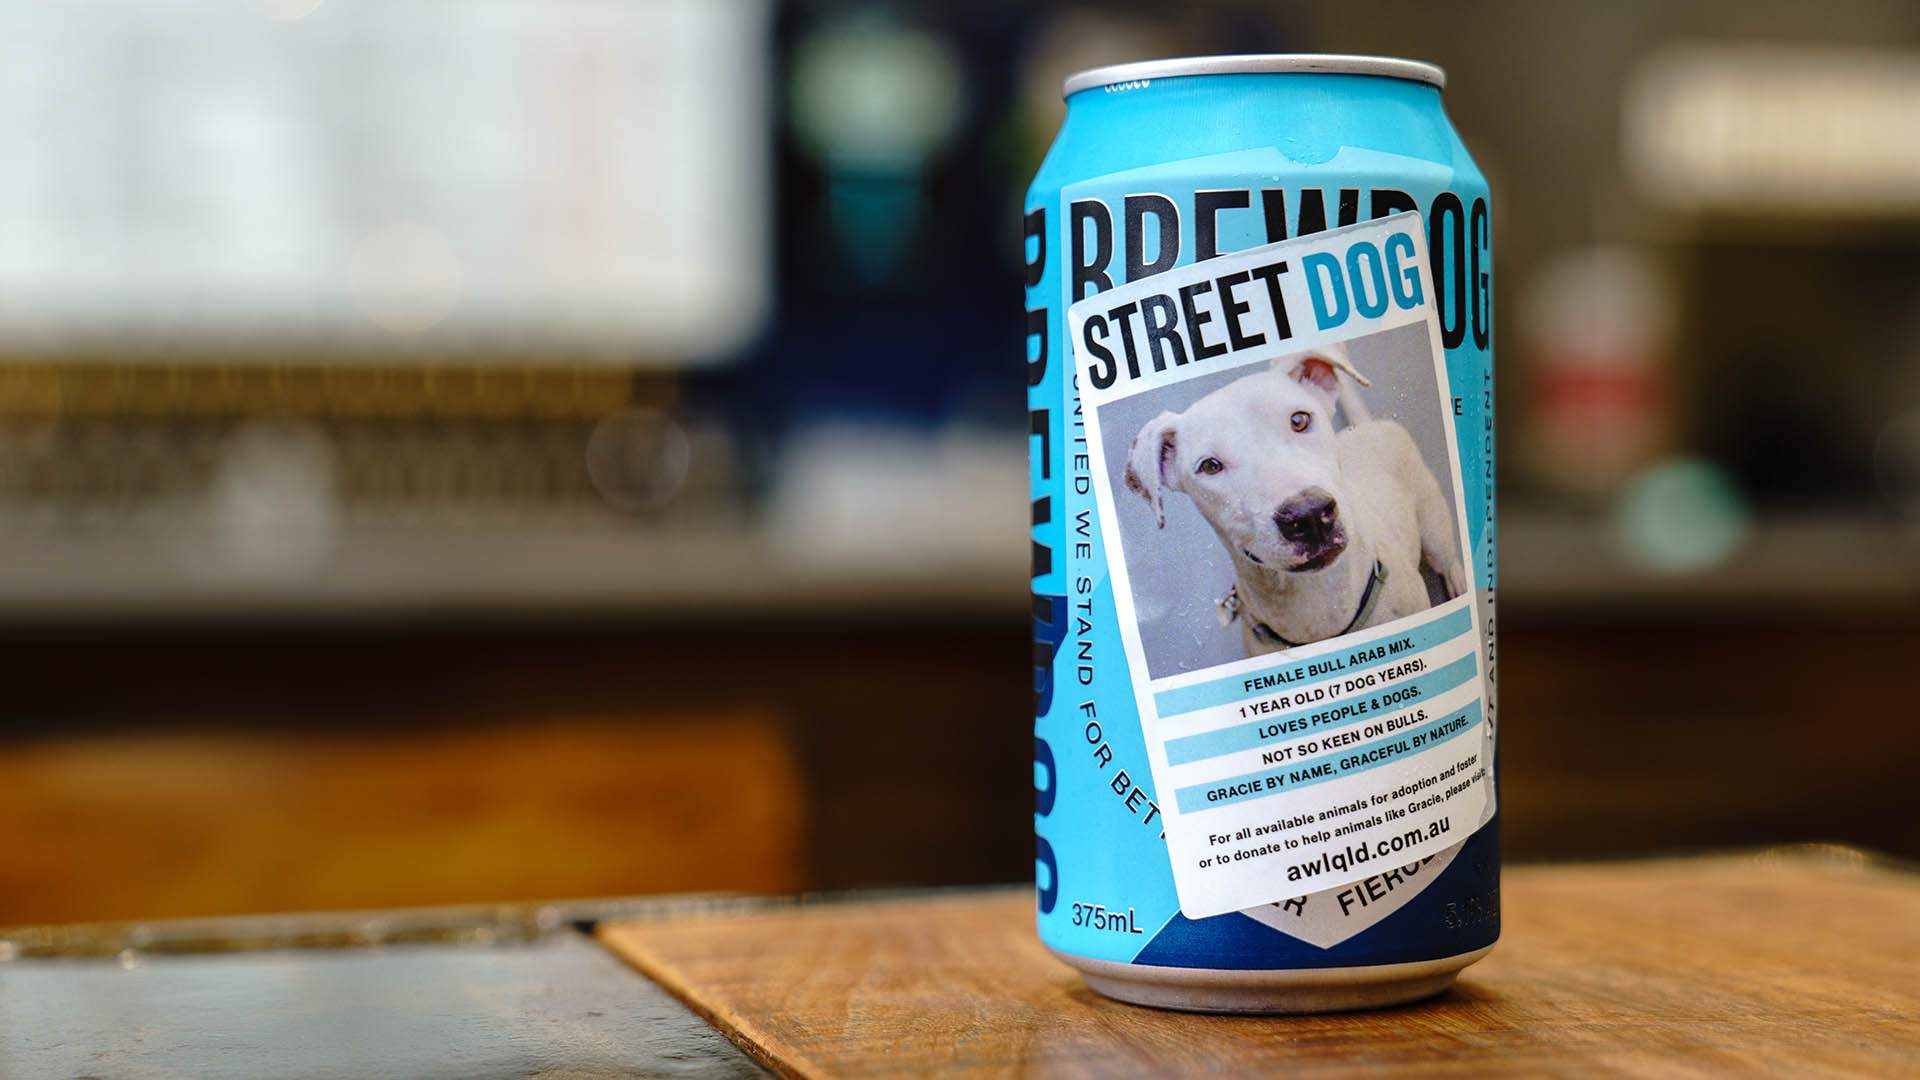 BrewDog Has Given Its Cans a Makeover to Profile Cute Pooches Currently Up for Adoption